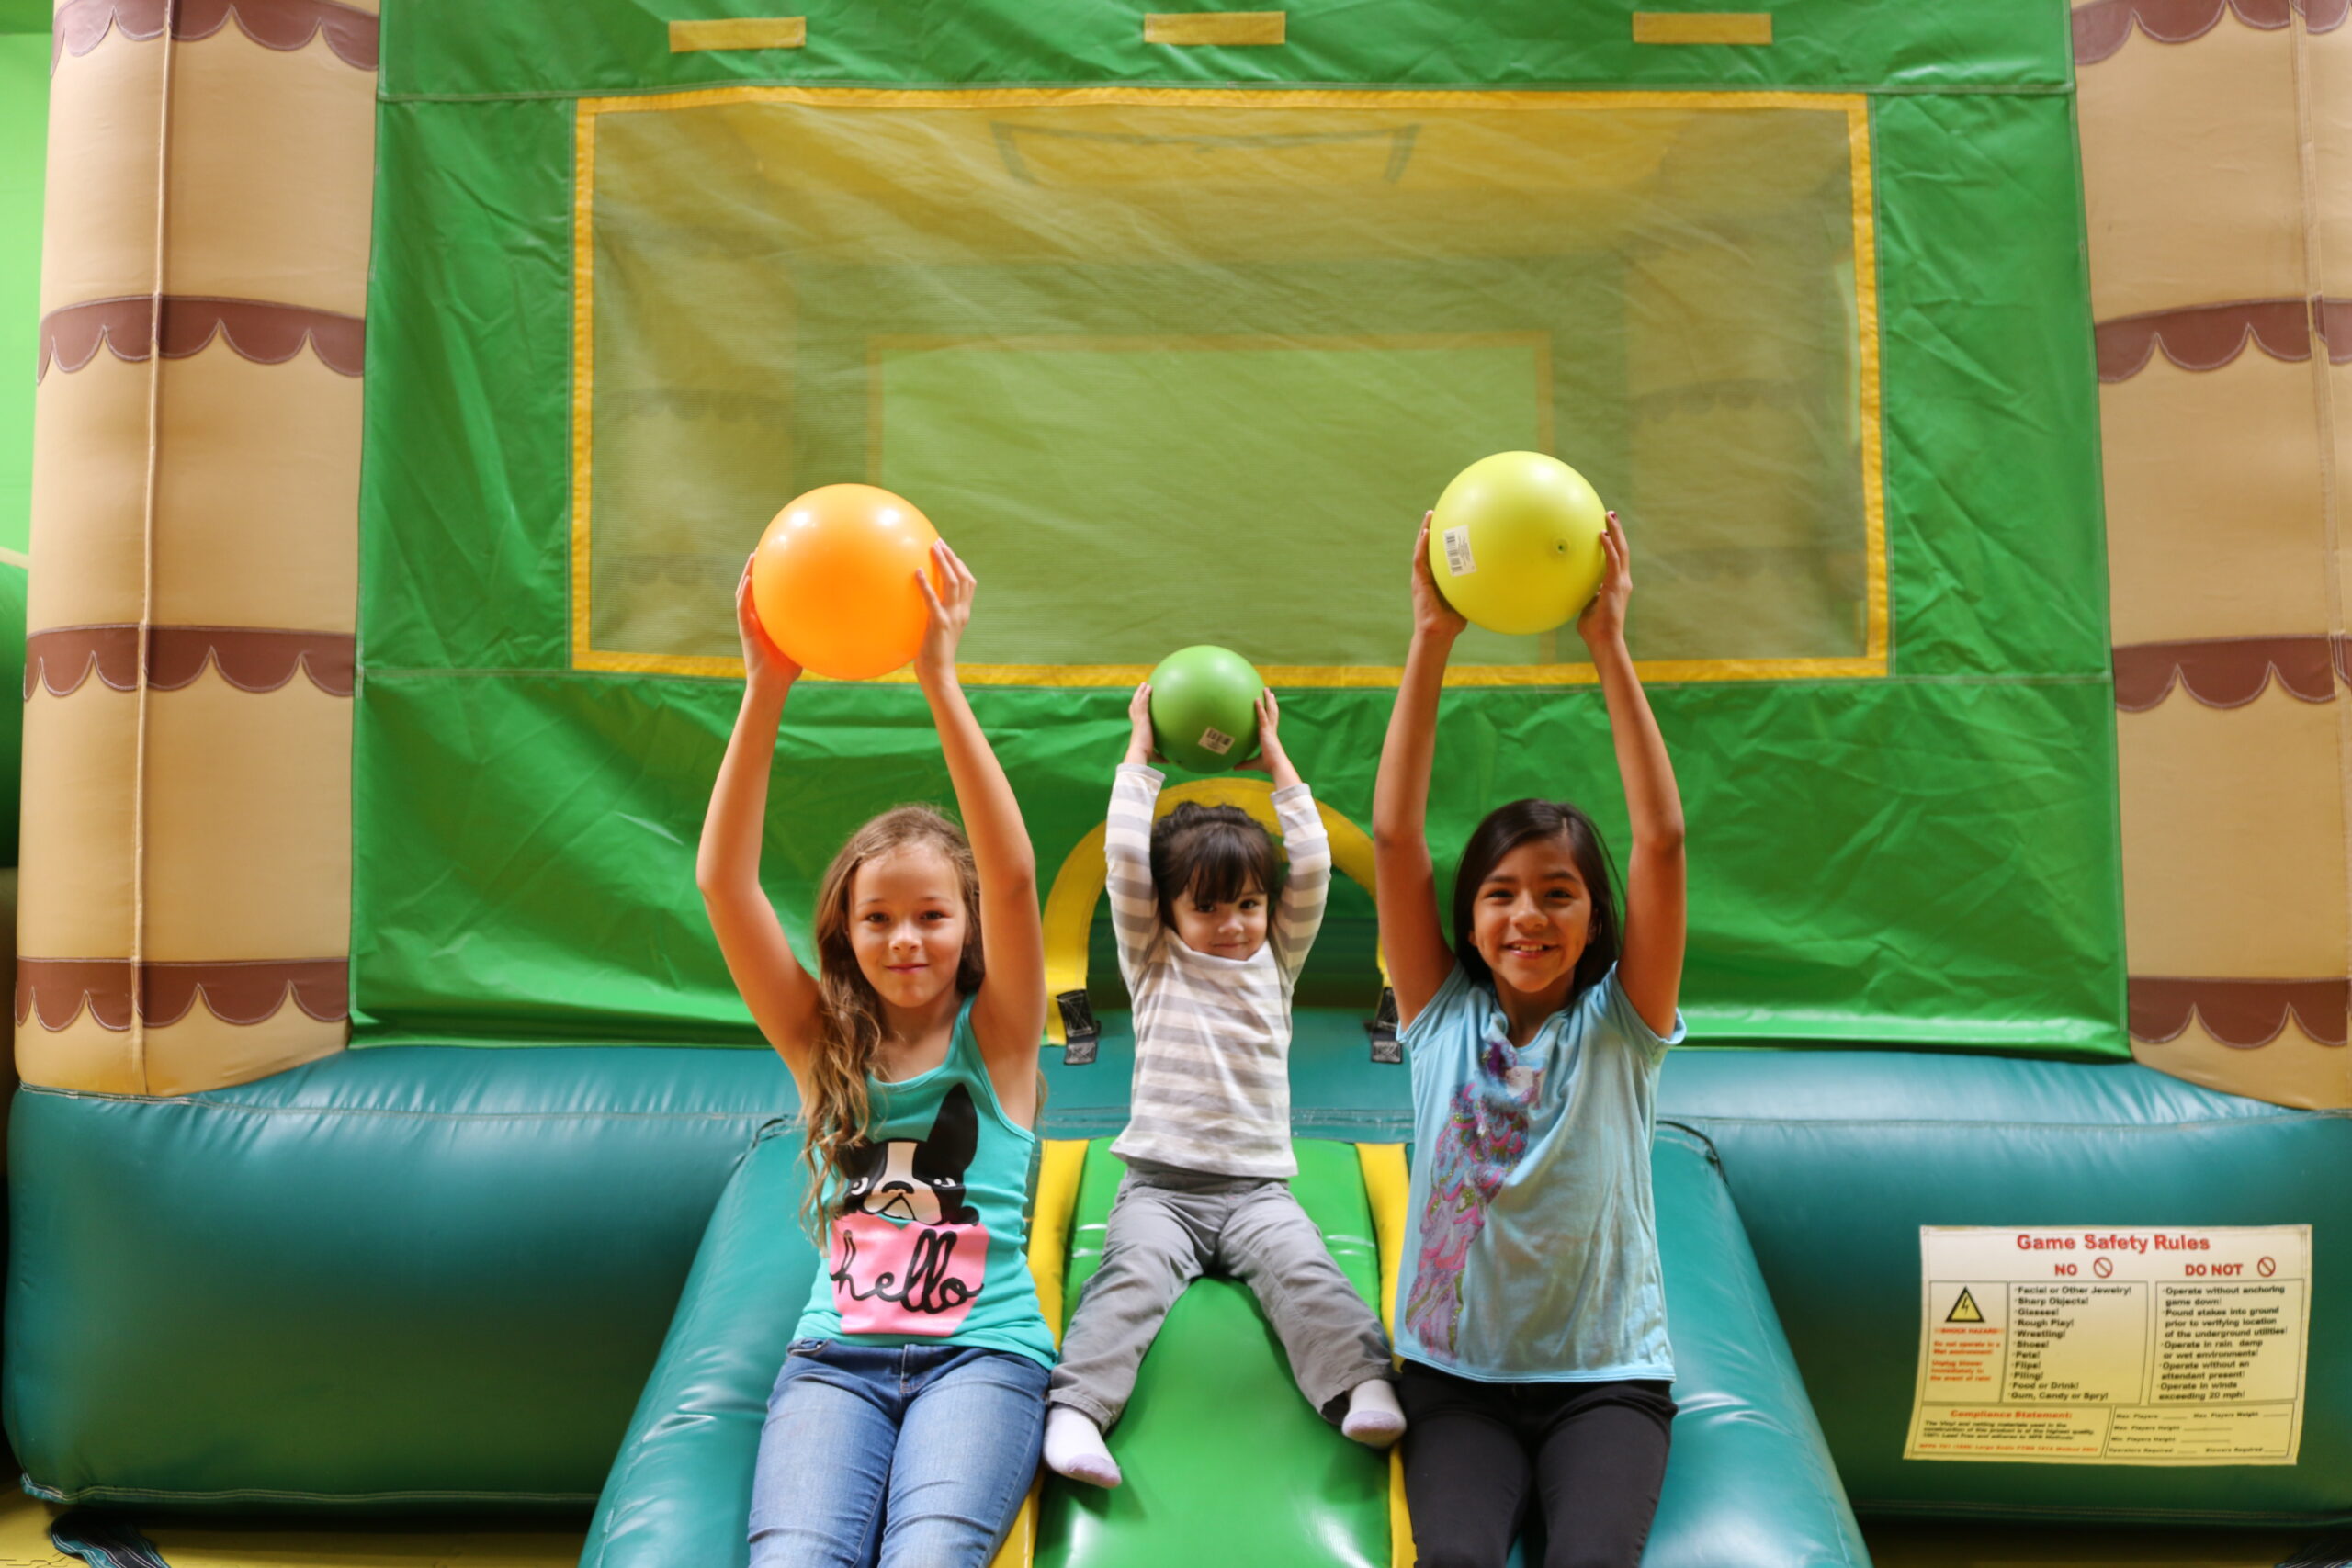 Three children playing in a bounce house with playballs.